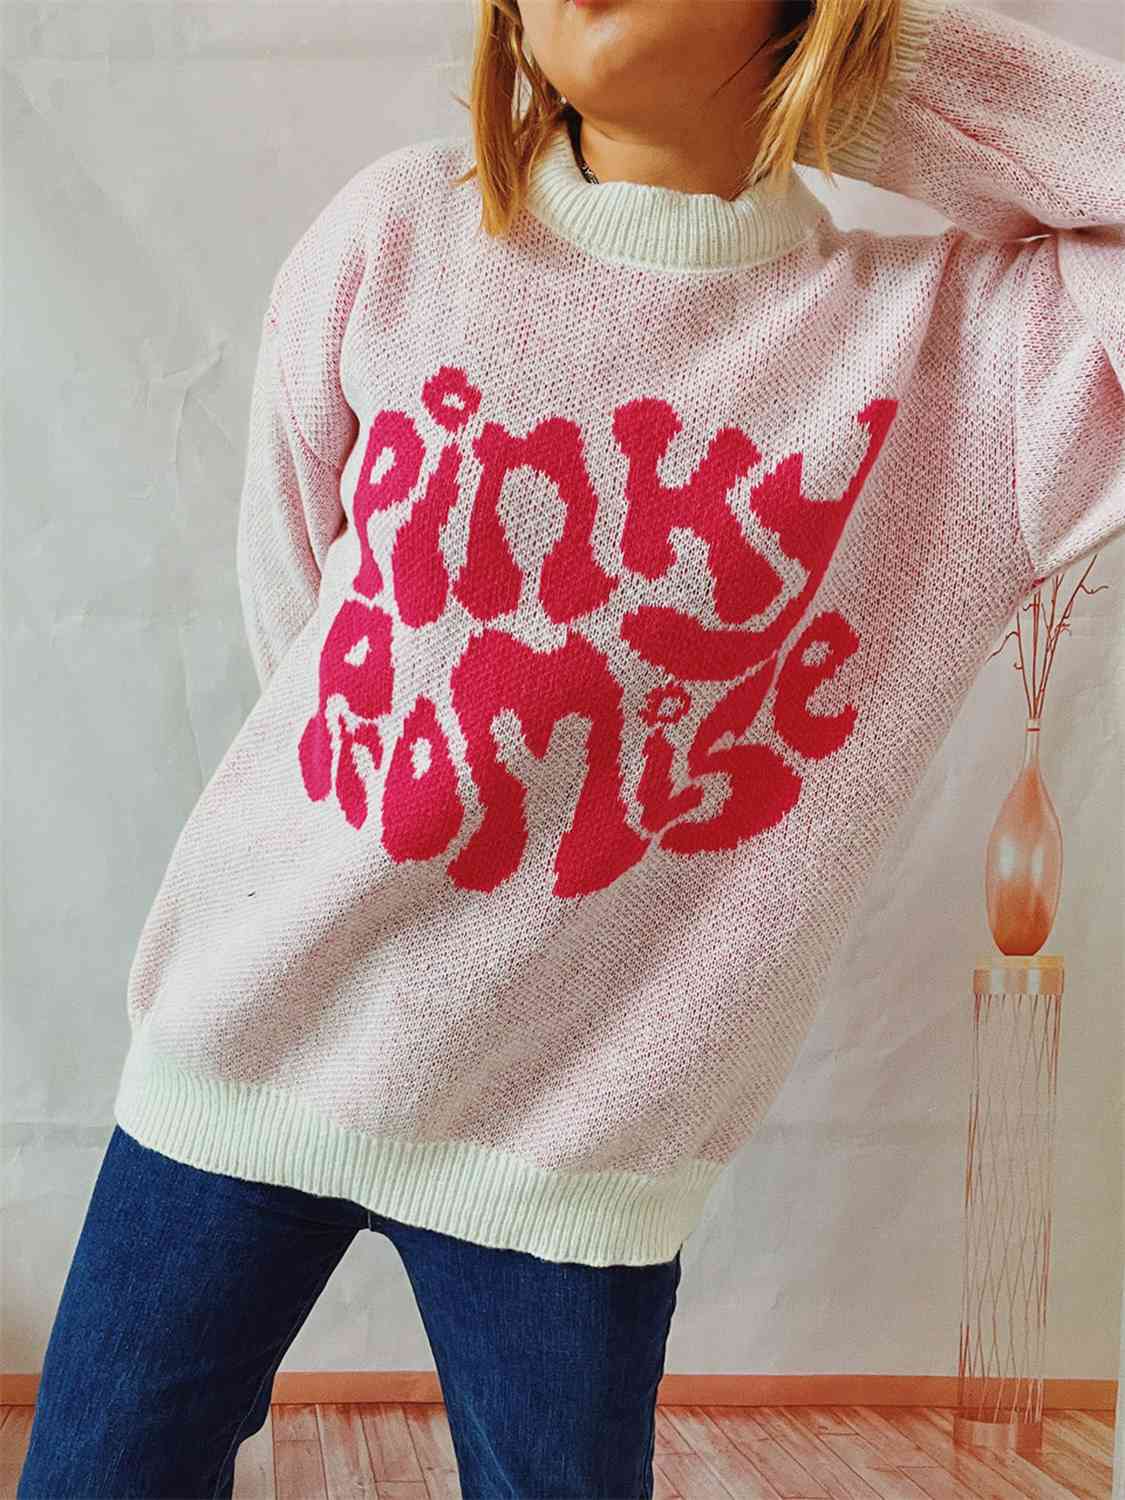 PINKY PROMISE Graphic Sweater - Sweaters - Shirts & Tops - 8 - 2024